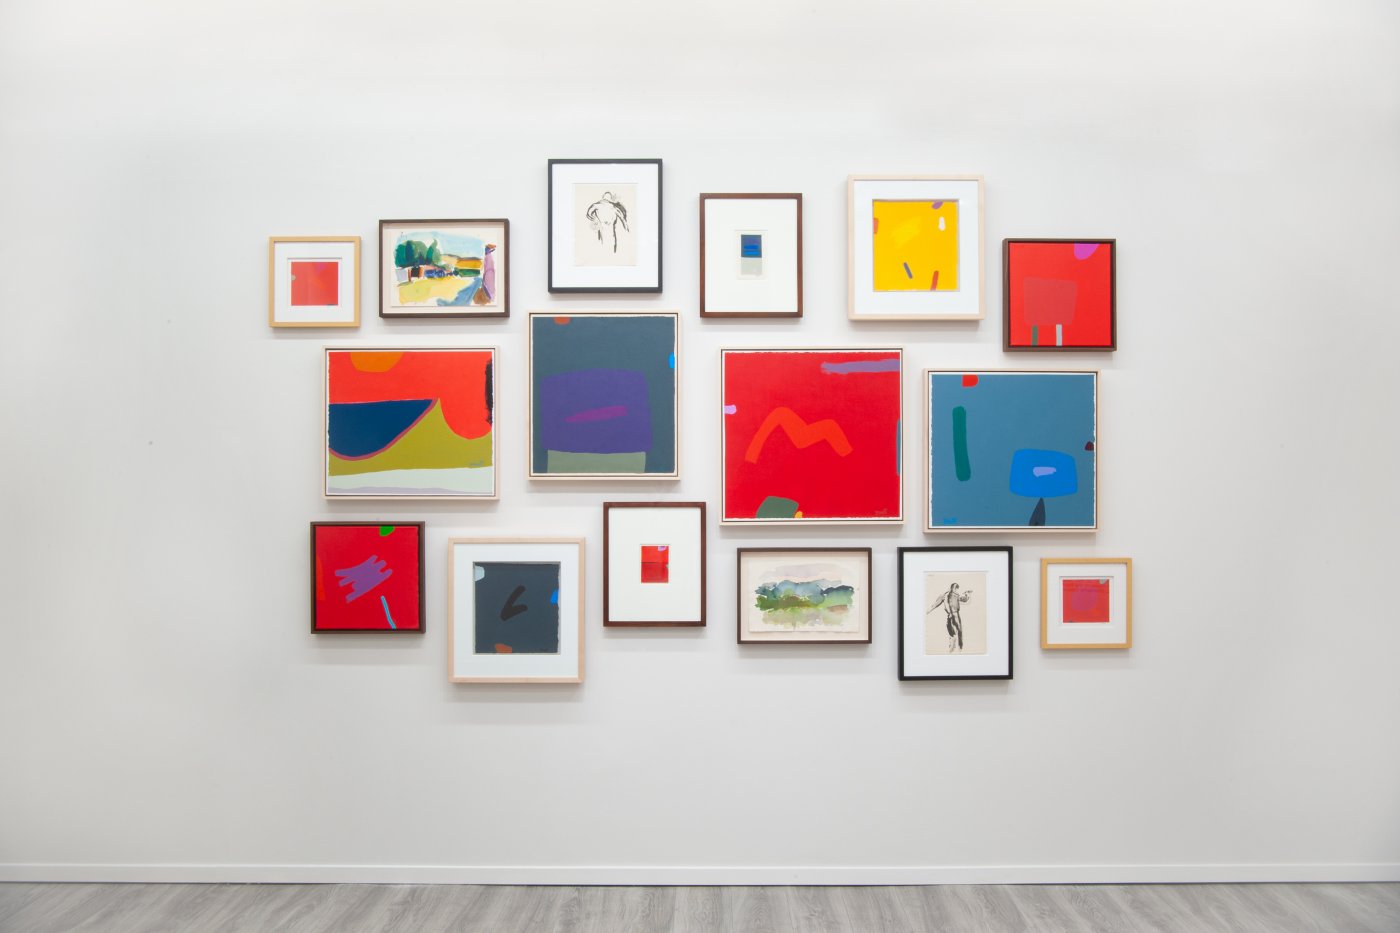 Installation image for Dorothy Fratt: Paint the Town Red, at Pazo Fine Art